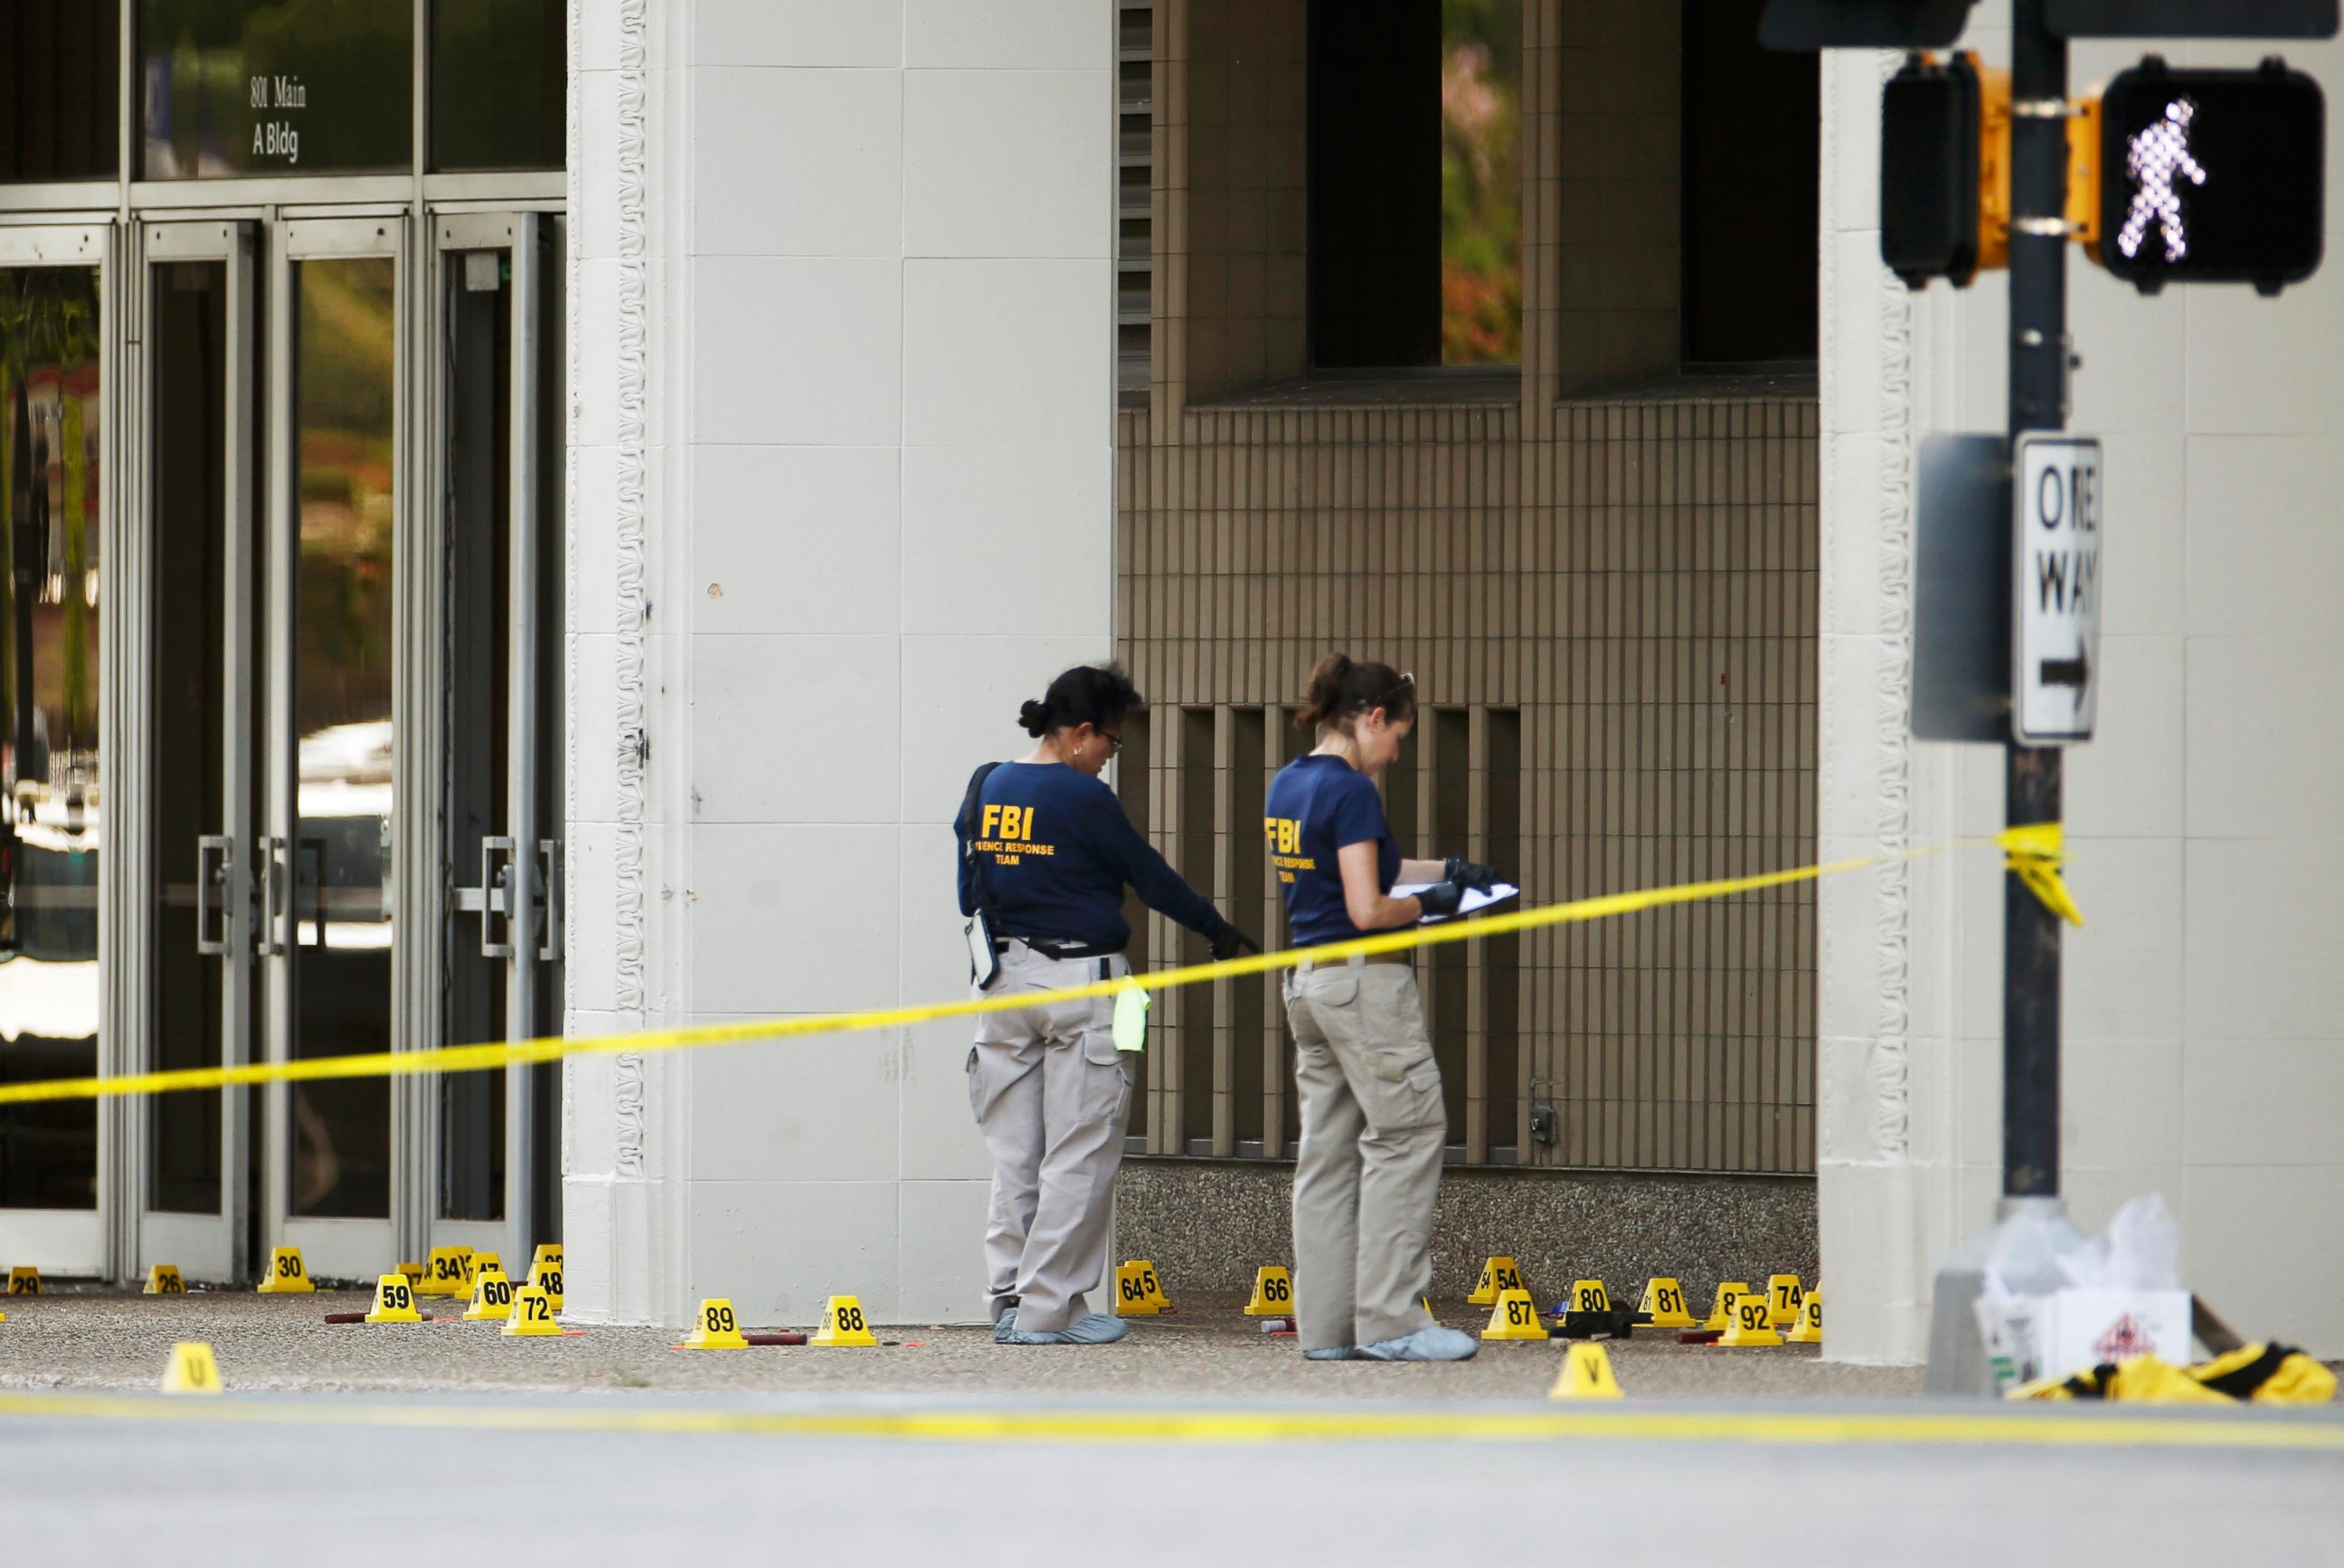 PHOTO: FBI investigators look over the crime scene in Dallas, July 8, 2016, following a Thursday night shooting incident that killed five police officers.  